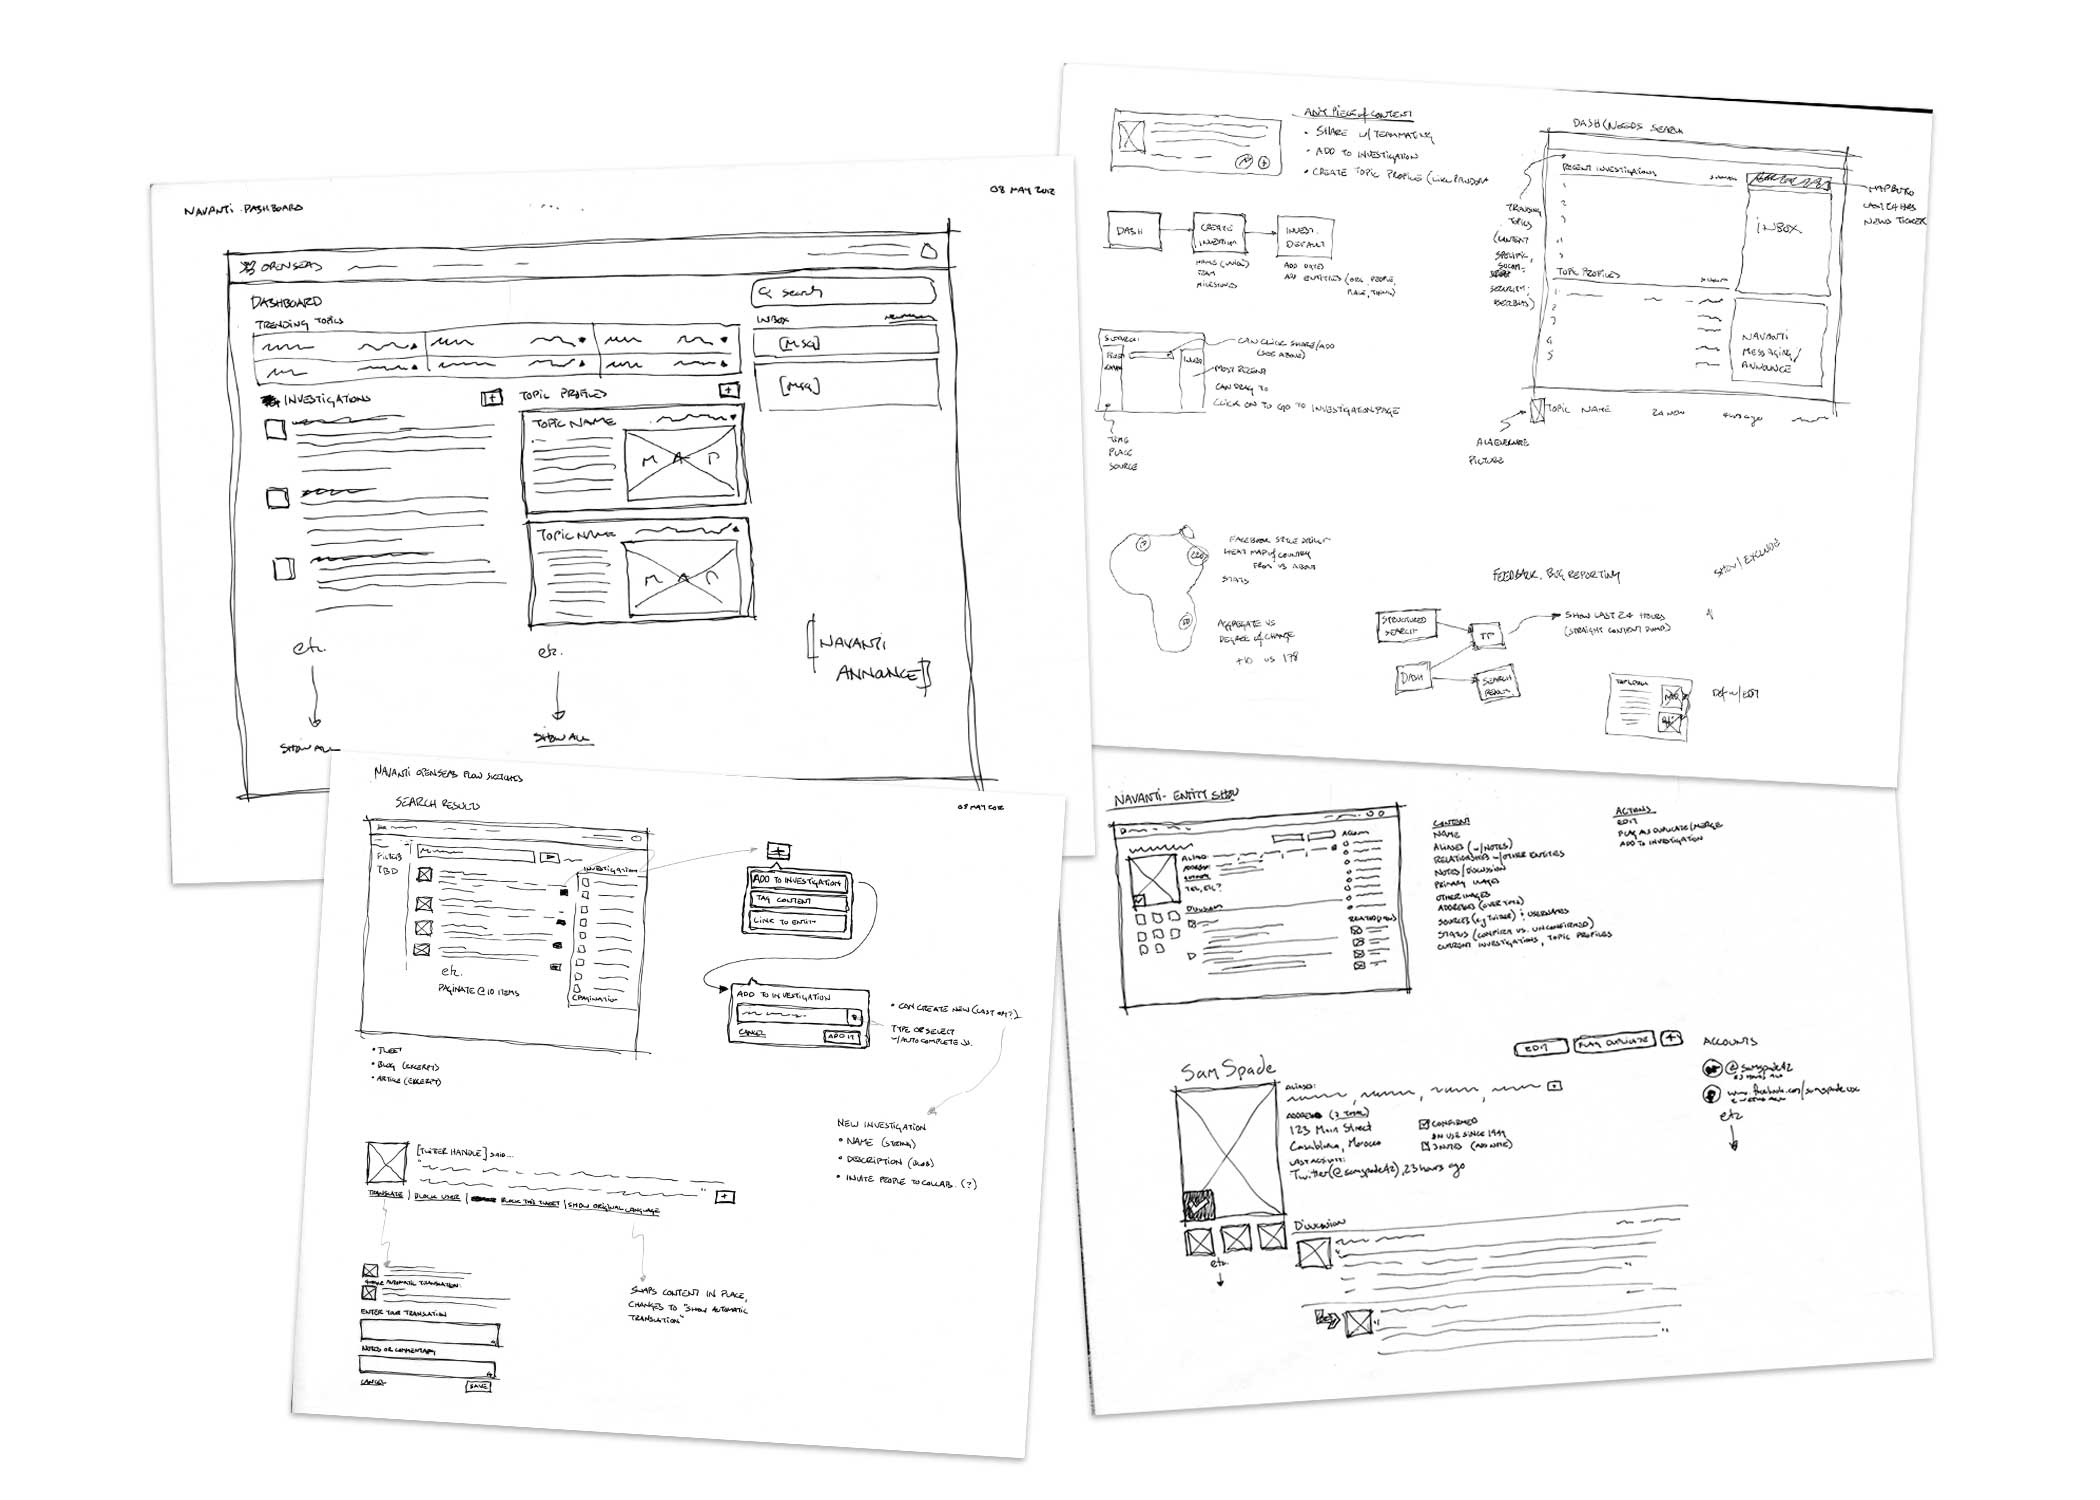 Early wireframe sketches and worksheets